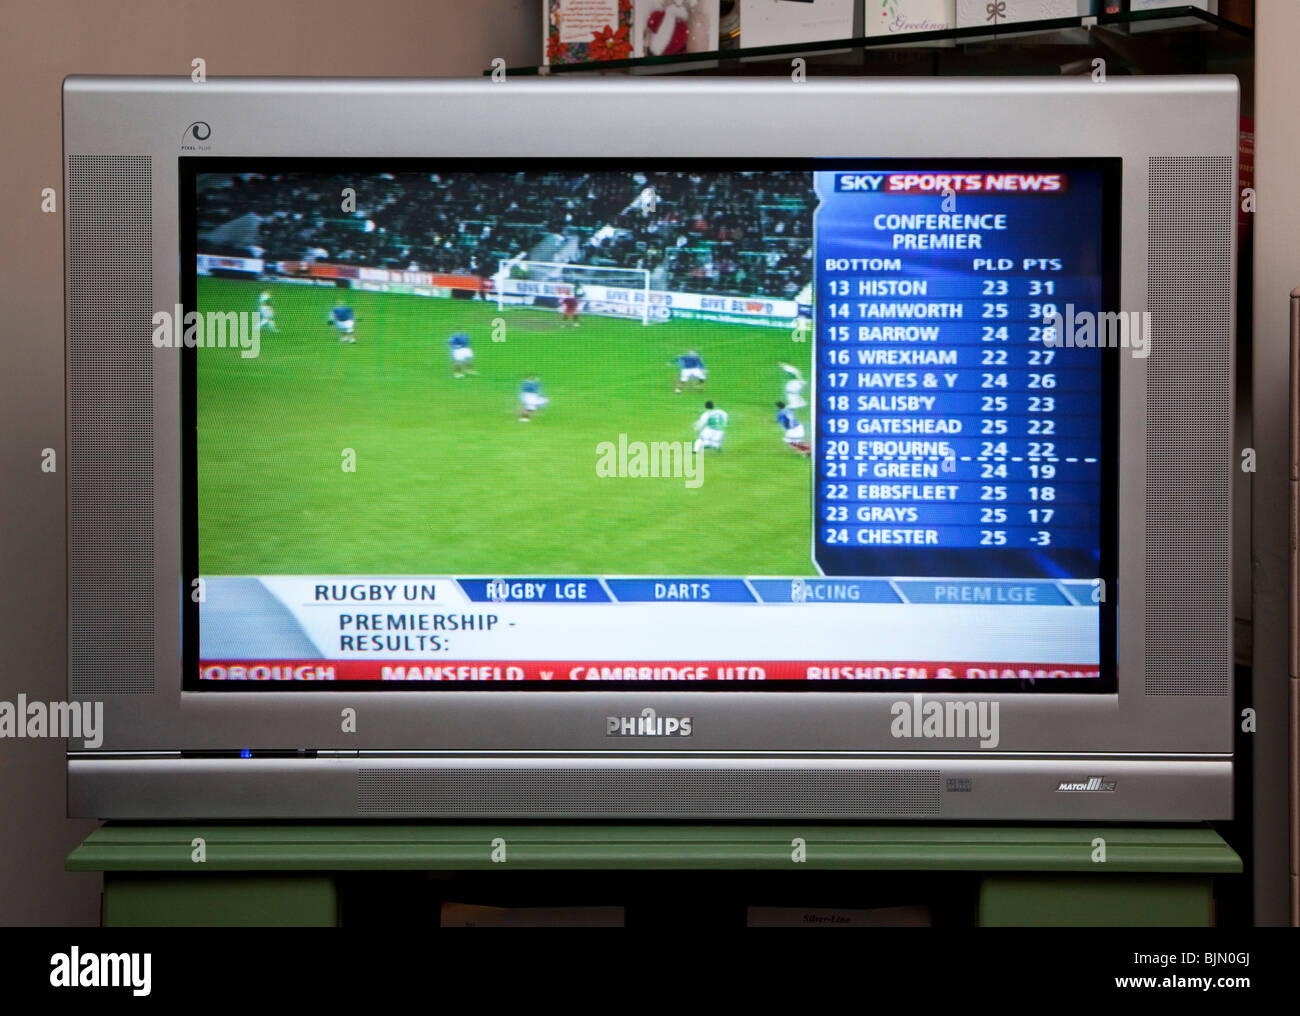 TV screen showing Sky Sports channel Stock Photo - Alamy